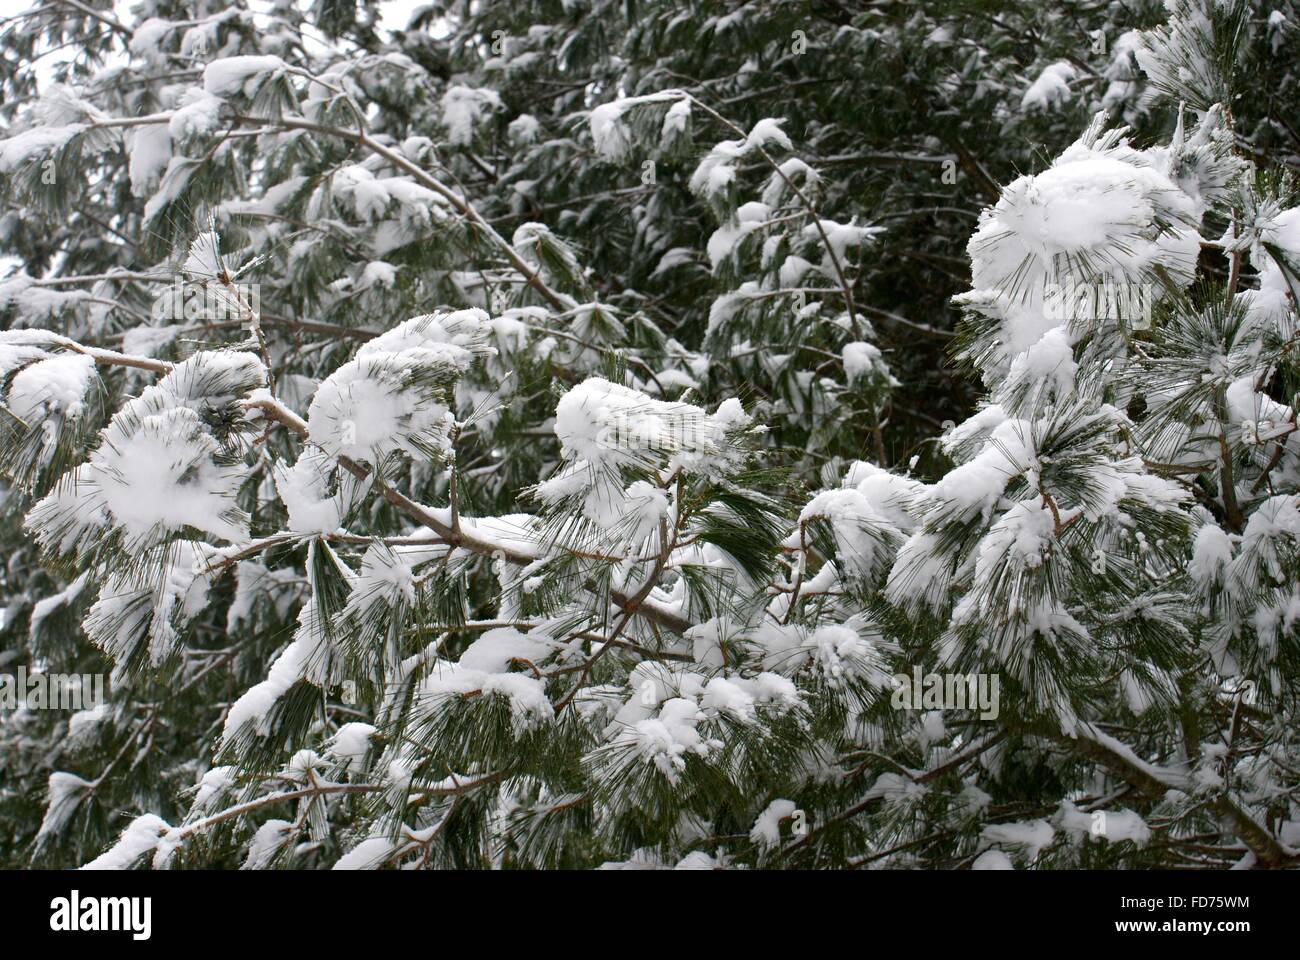 Beautiful close up snow covered pine needles. Stock Photo